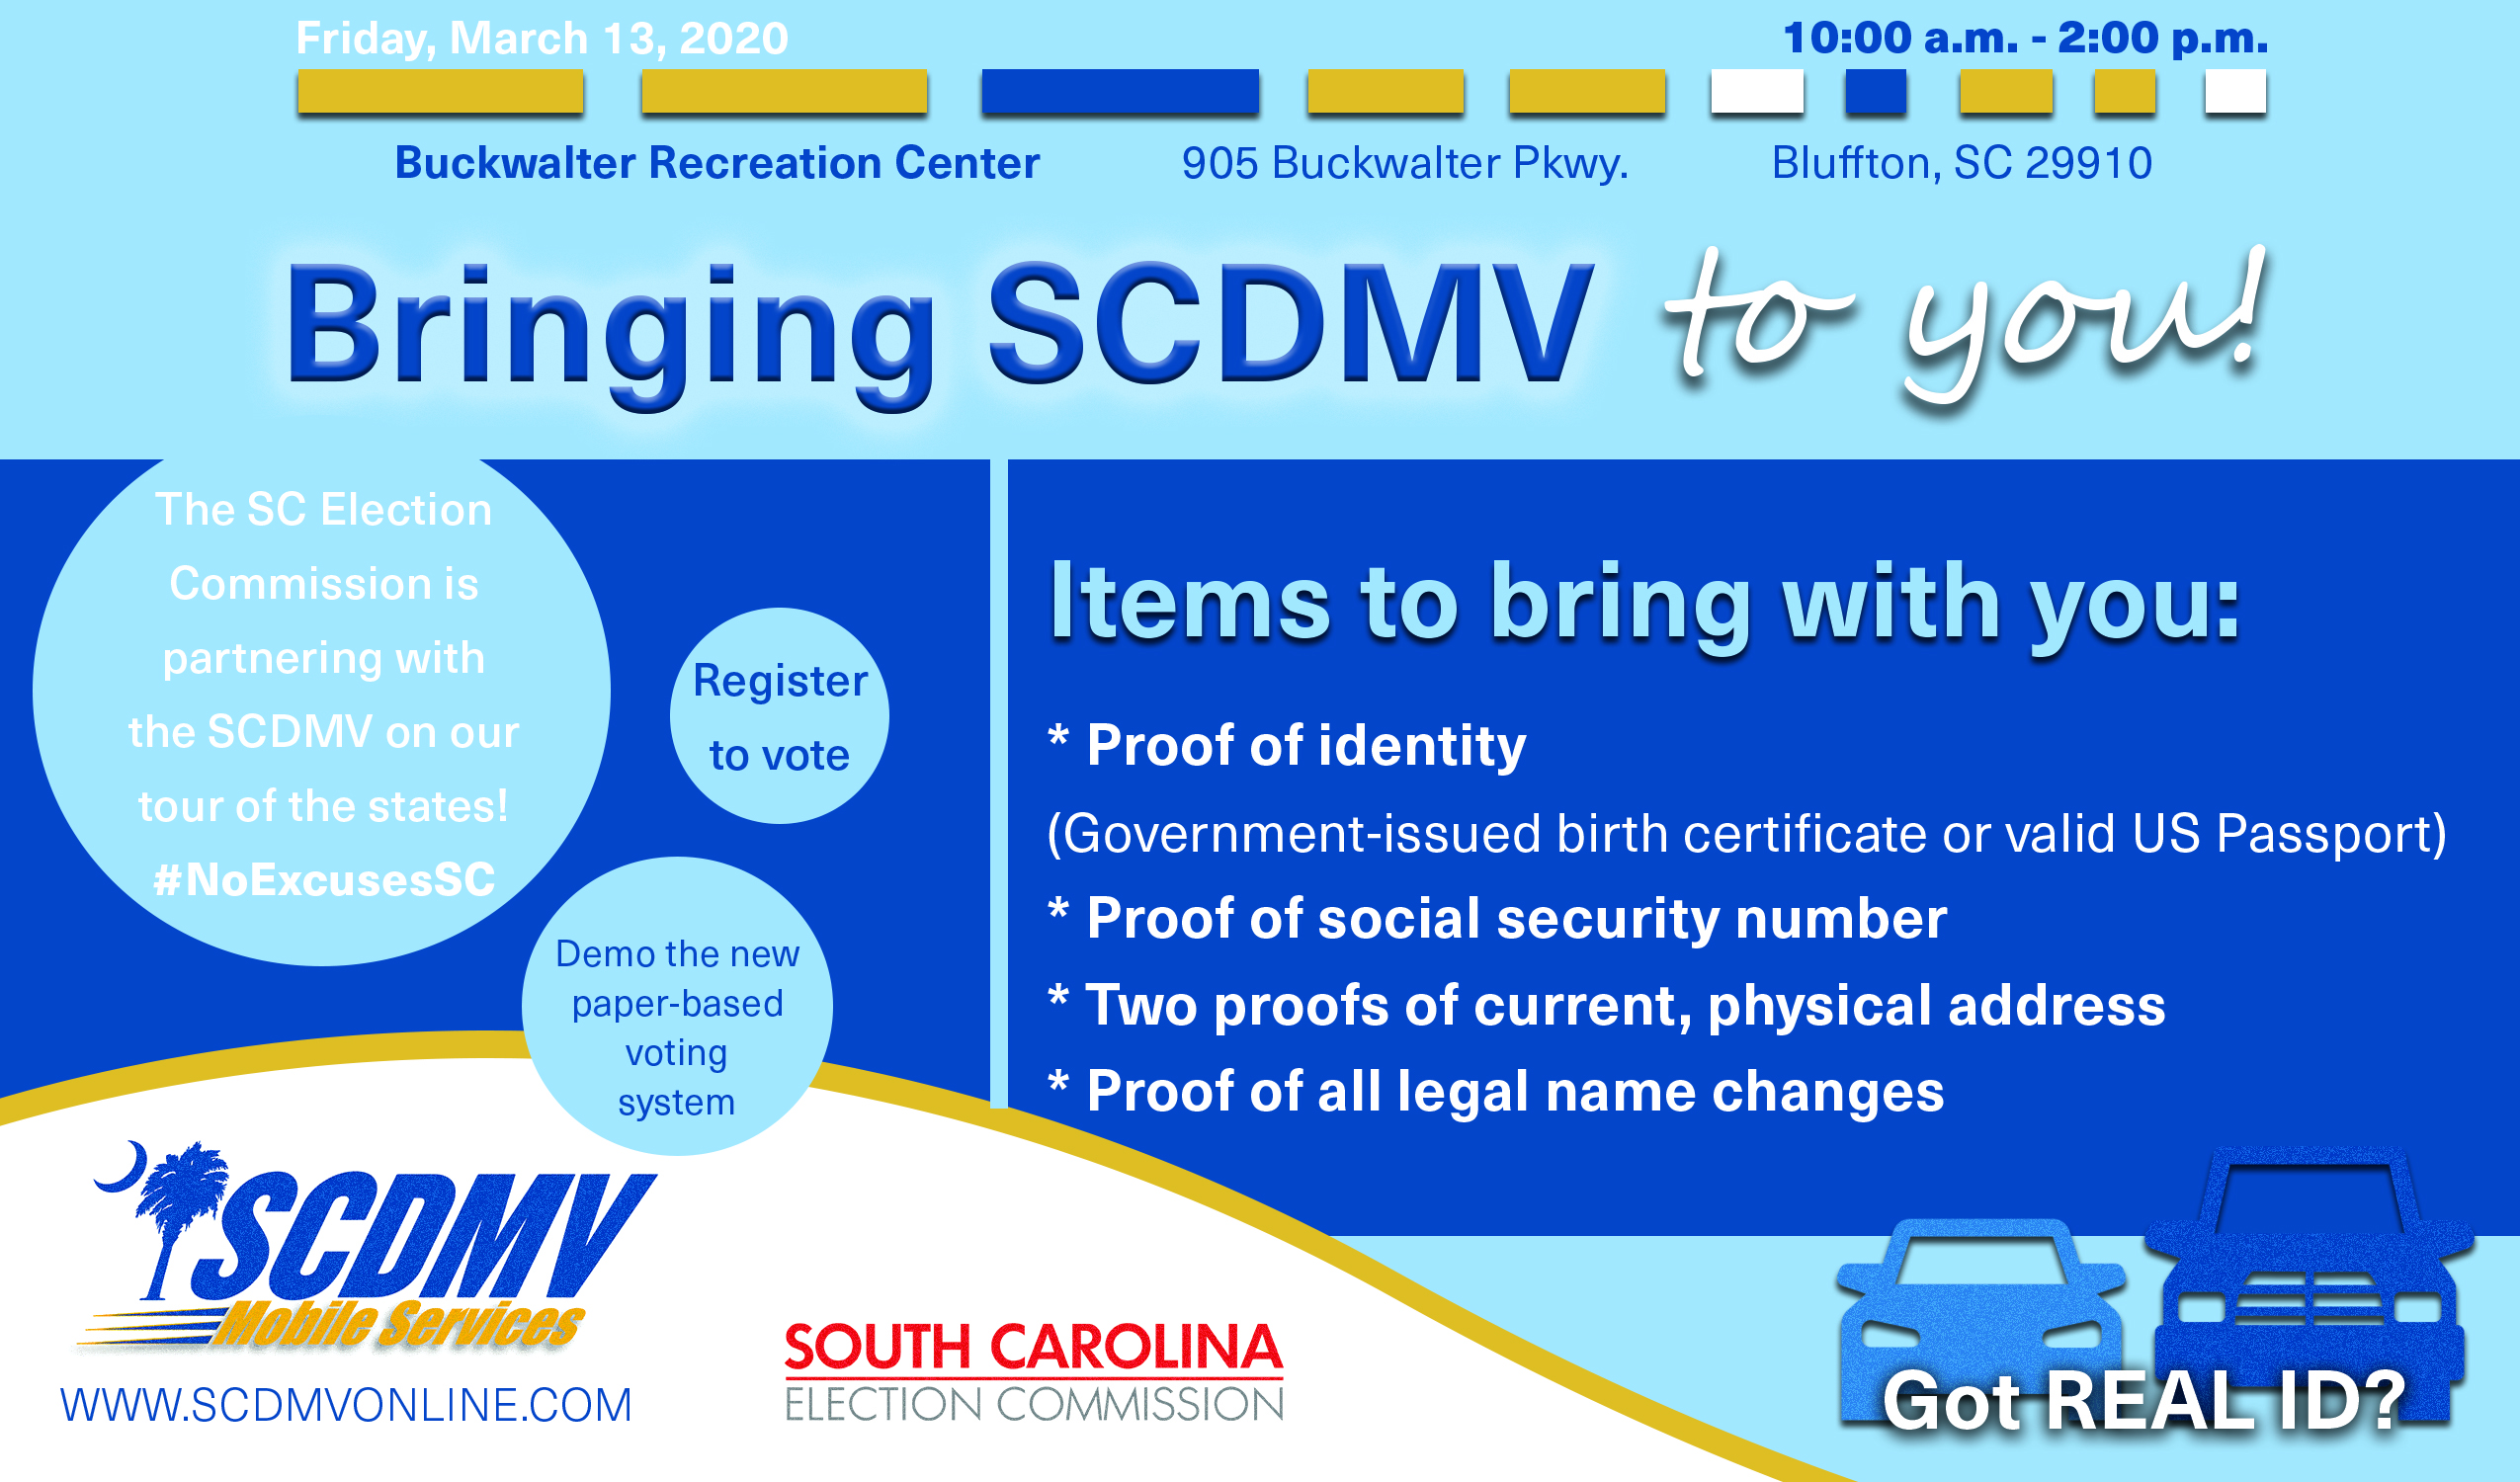 SC DMV Mobile Office and SC Election Commission to Visit Beaufort